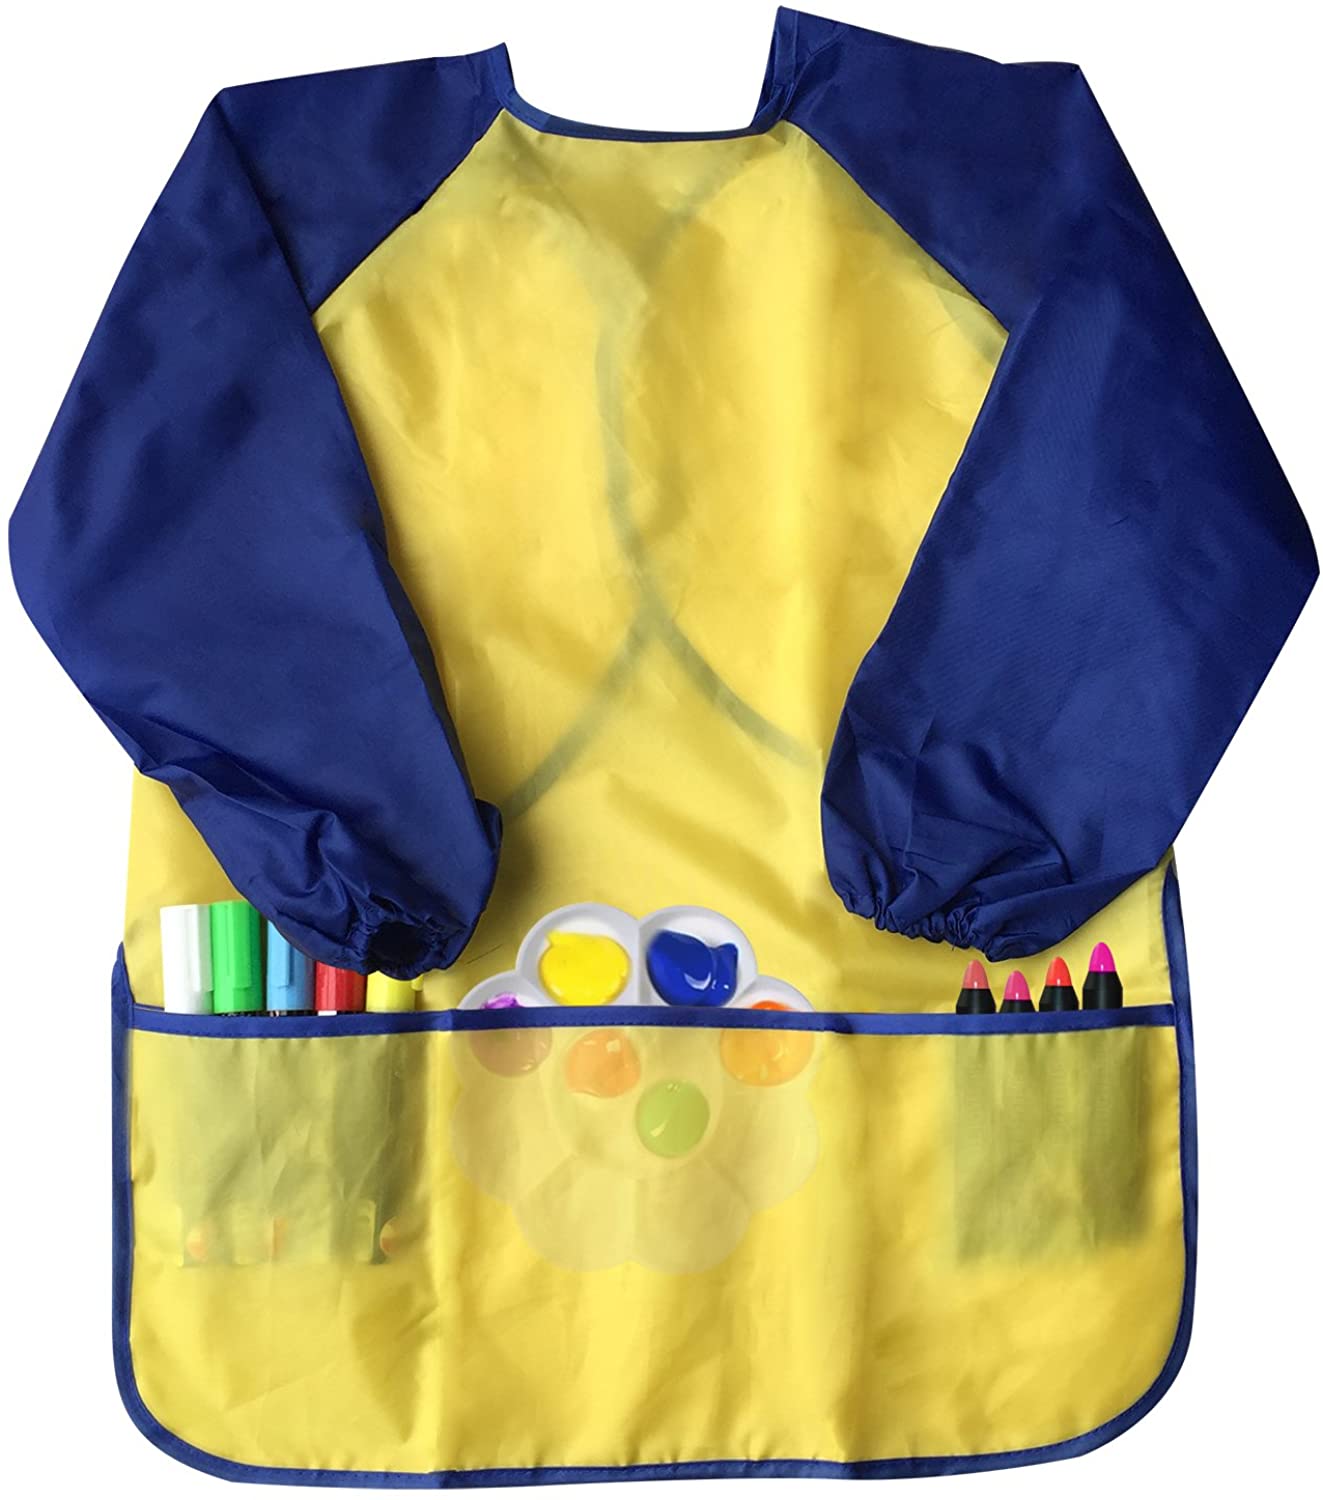 3-10 years old Kids Children Art Class Painting Apron Smock with 3 Pockets  Todder Waterproof Long Sleeve Art Smock Apron for Drawing Kitchen Cooking